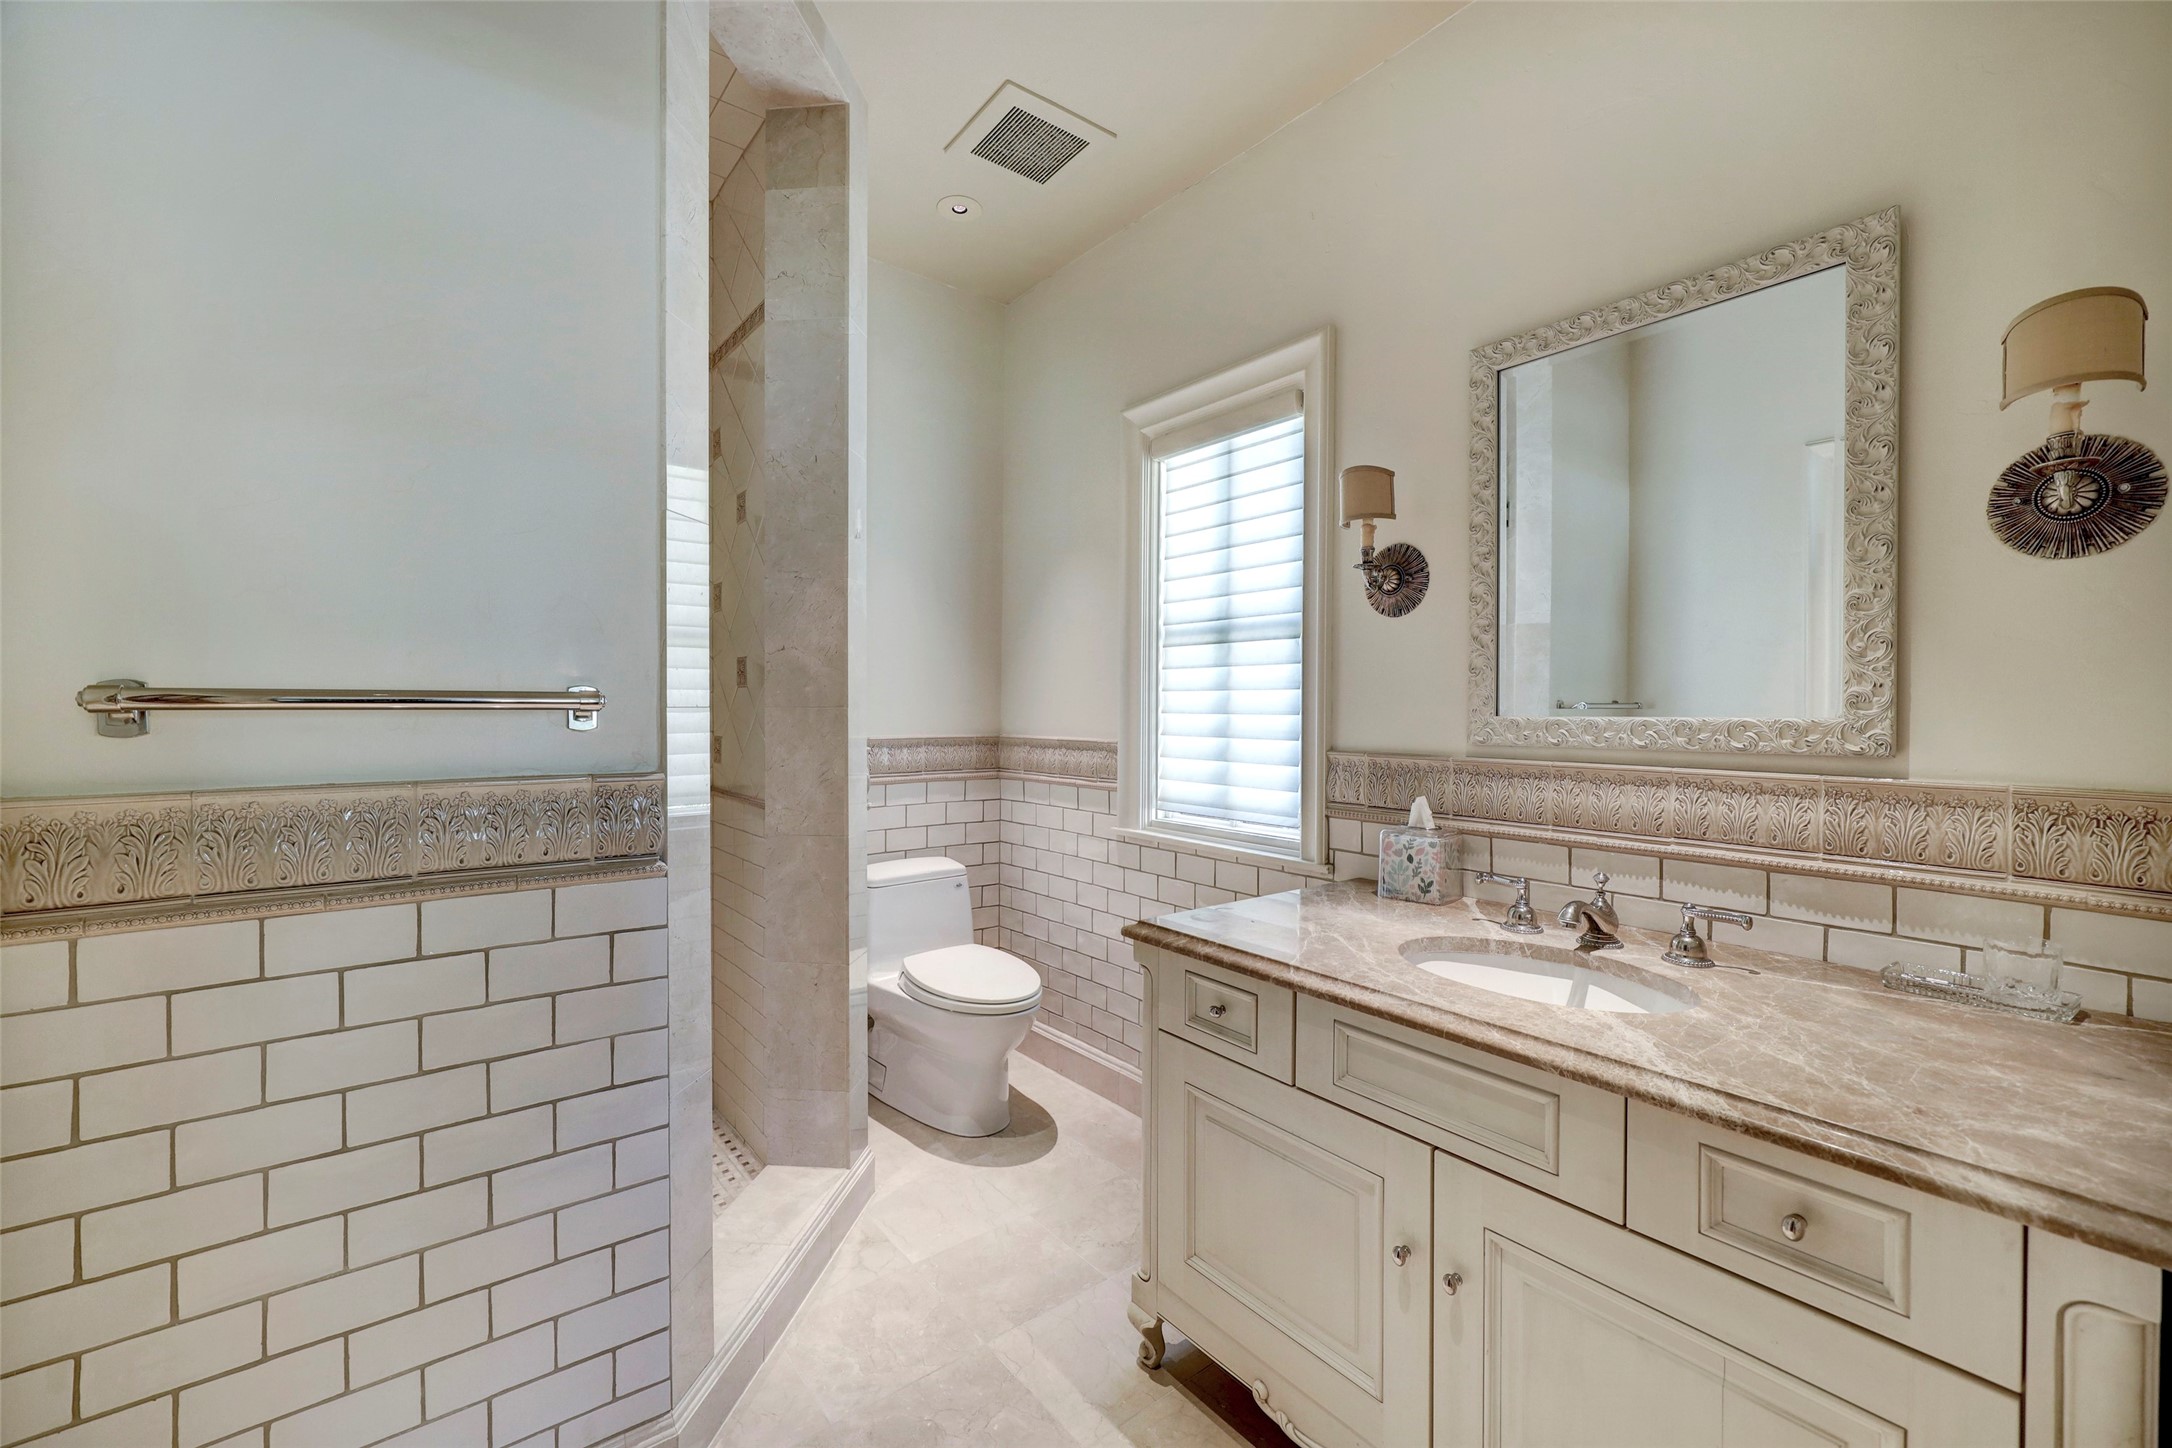 Bathroom for the 4th bedroom with beautiful tile work and quality finishes.